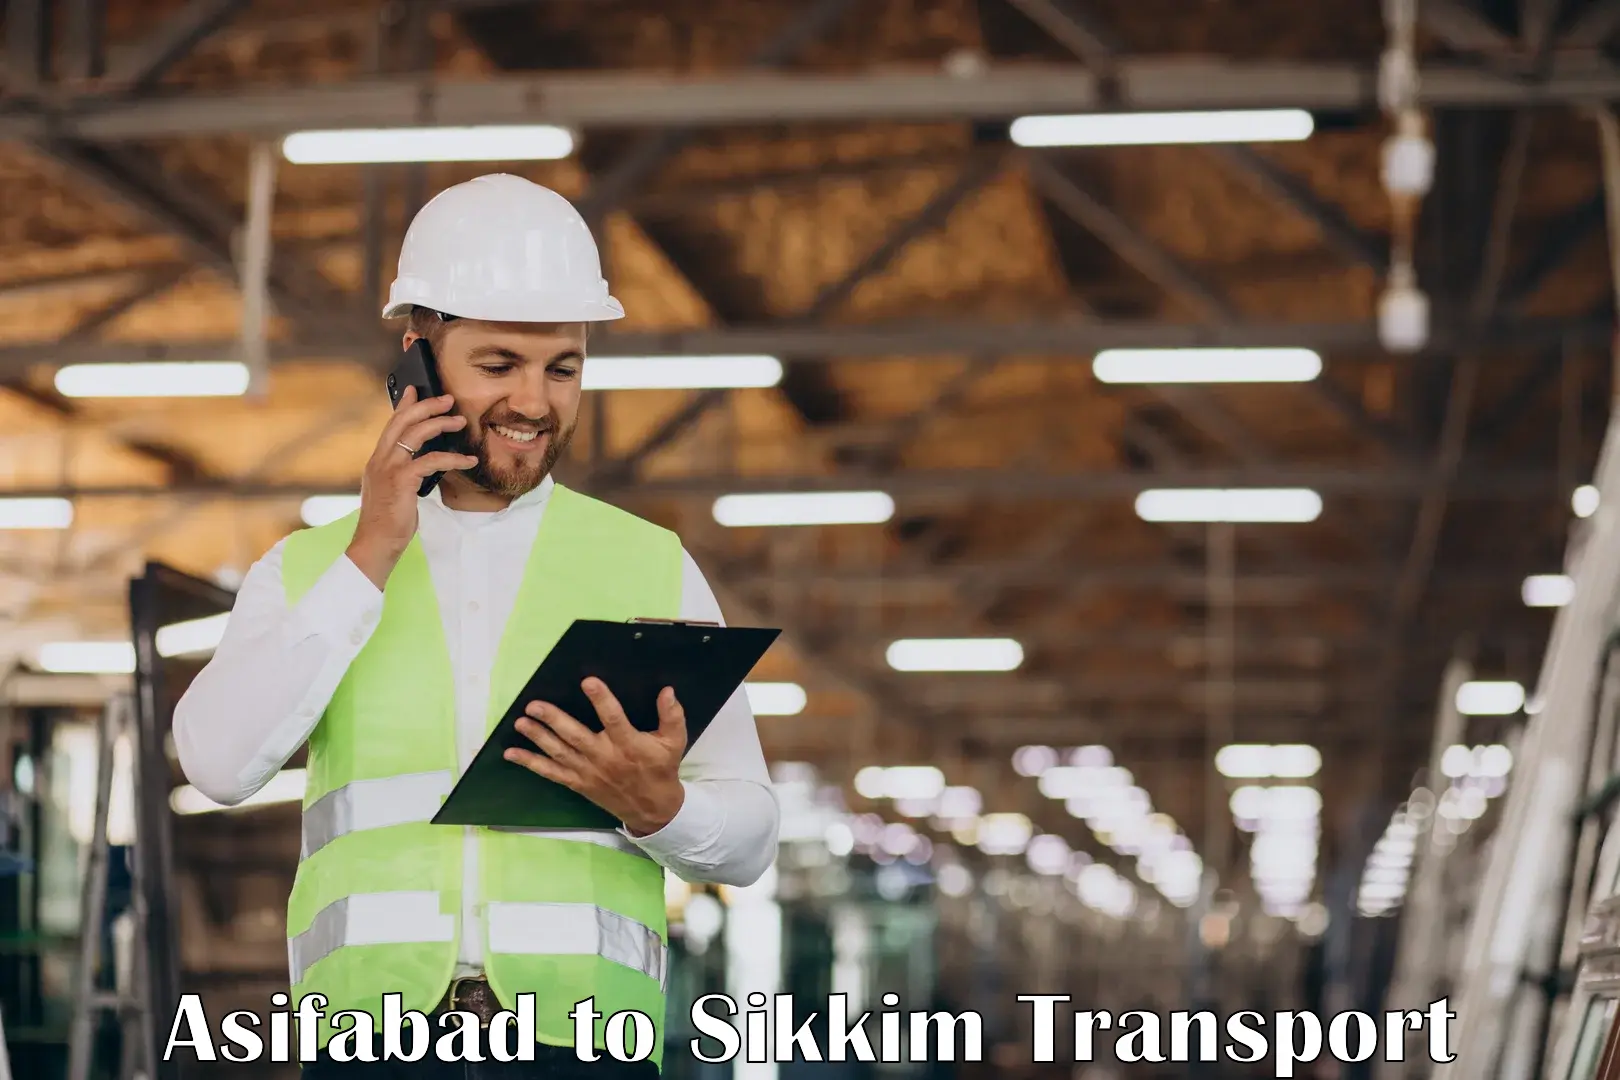 Online transport service Asifabad to Sikkim